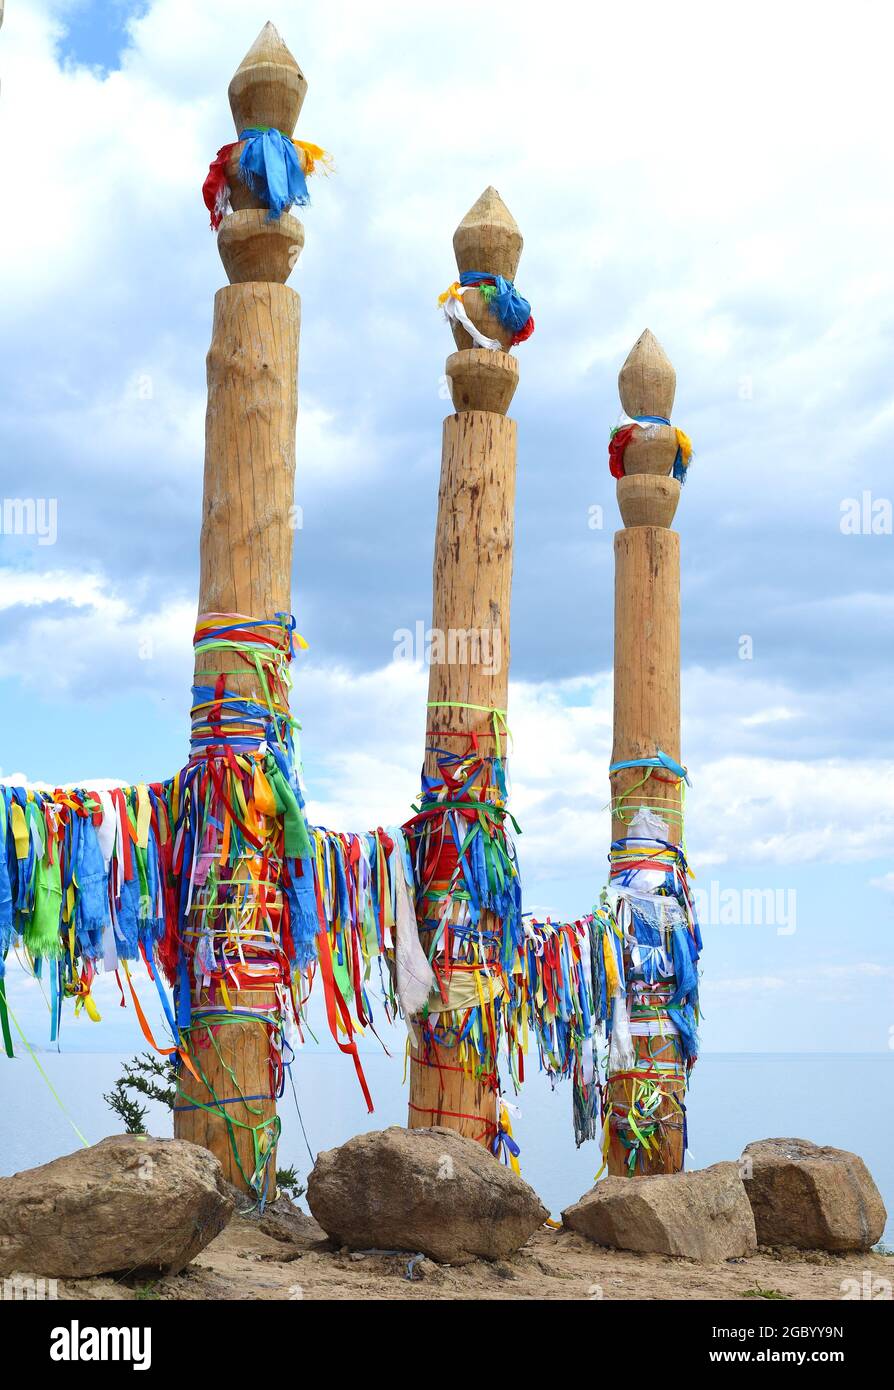 Colorful ribbons on hitching posts of shamanism religion in Khuzhir, island Olkhon. Stock Photo